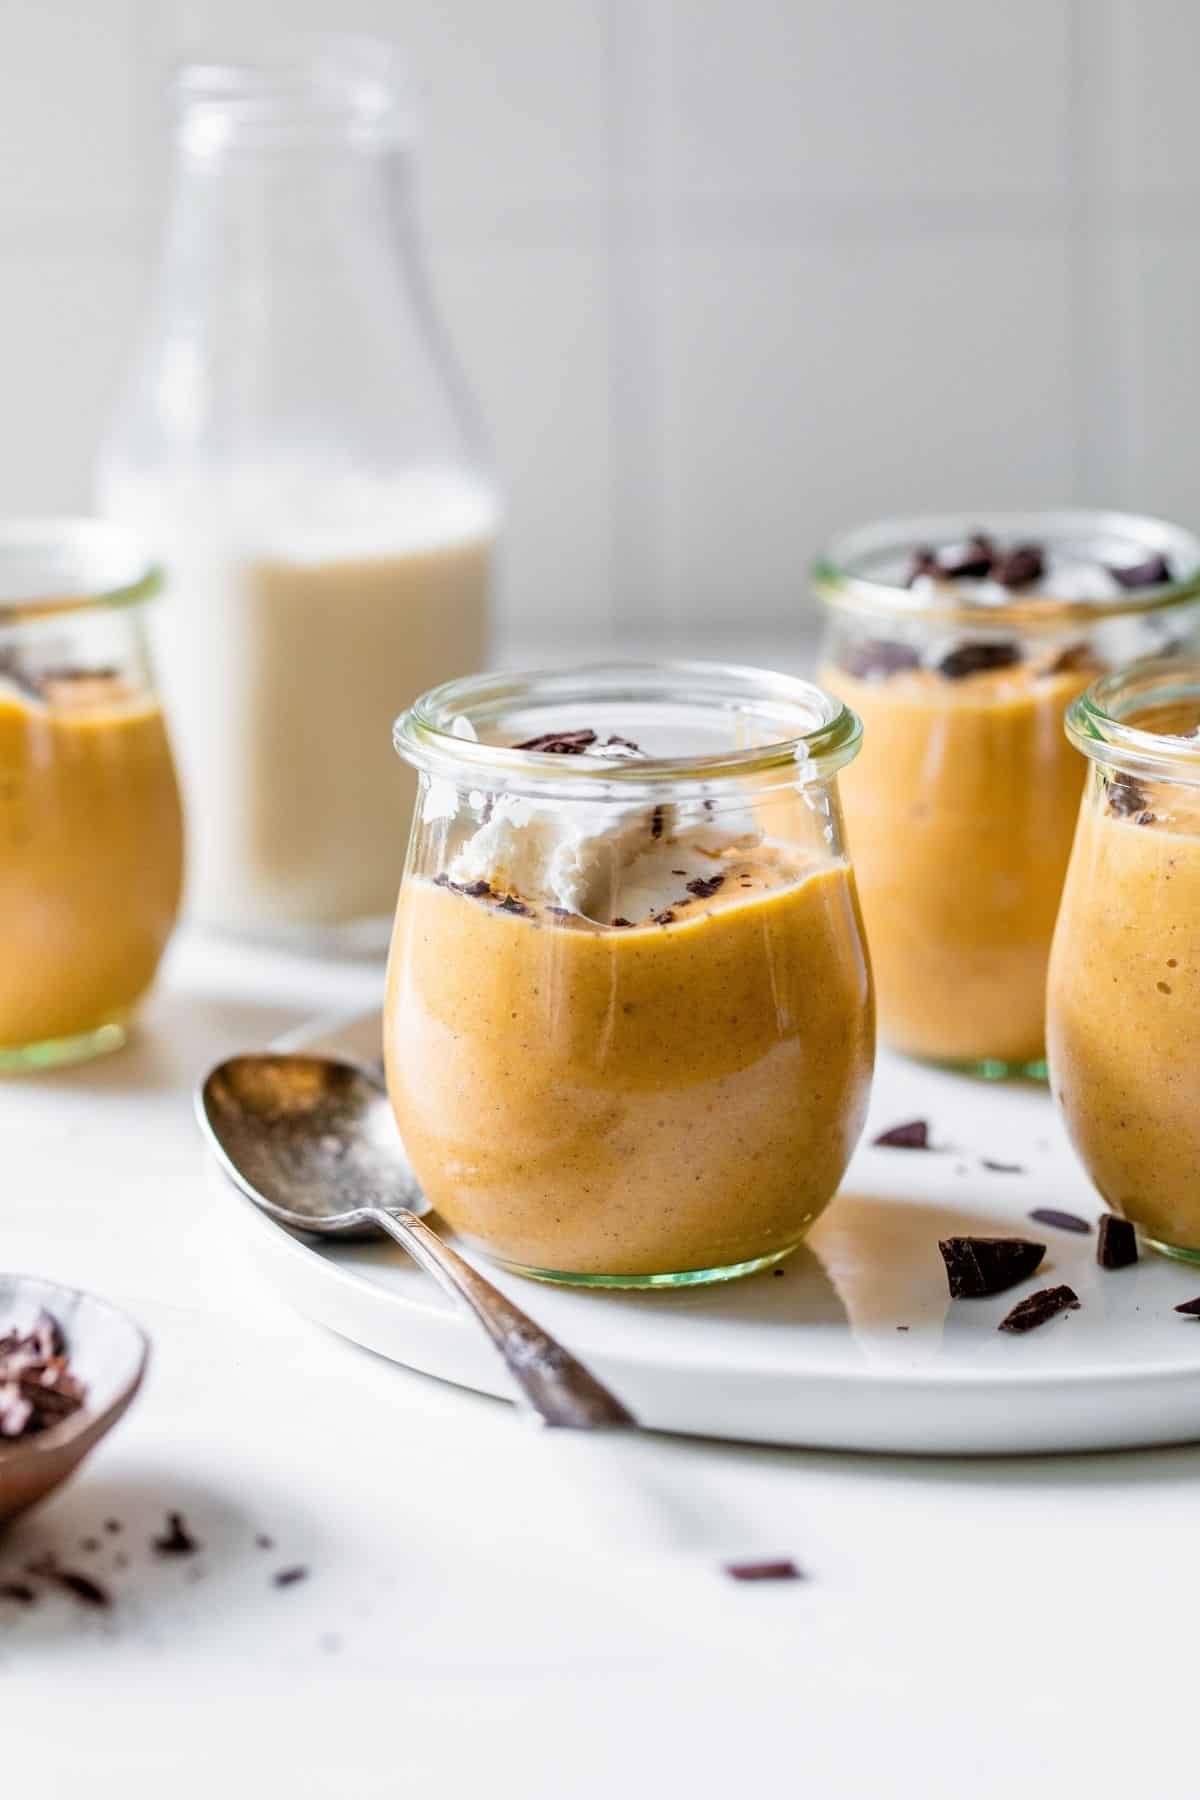 pumpkin mousse in a small jar served with a jug of milk